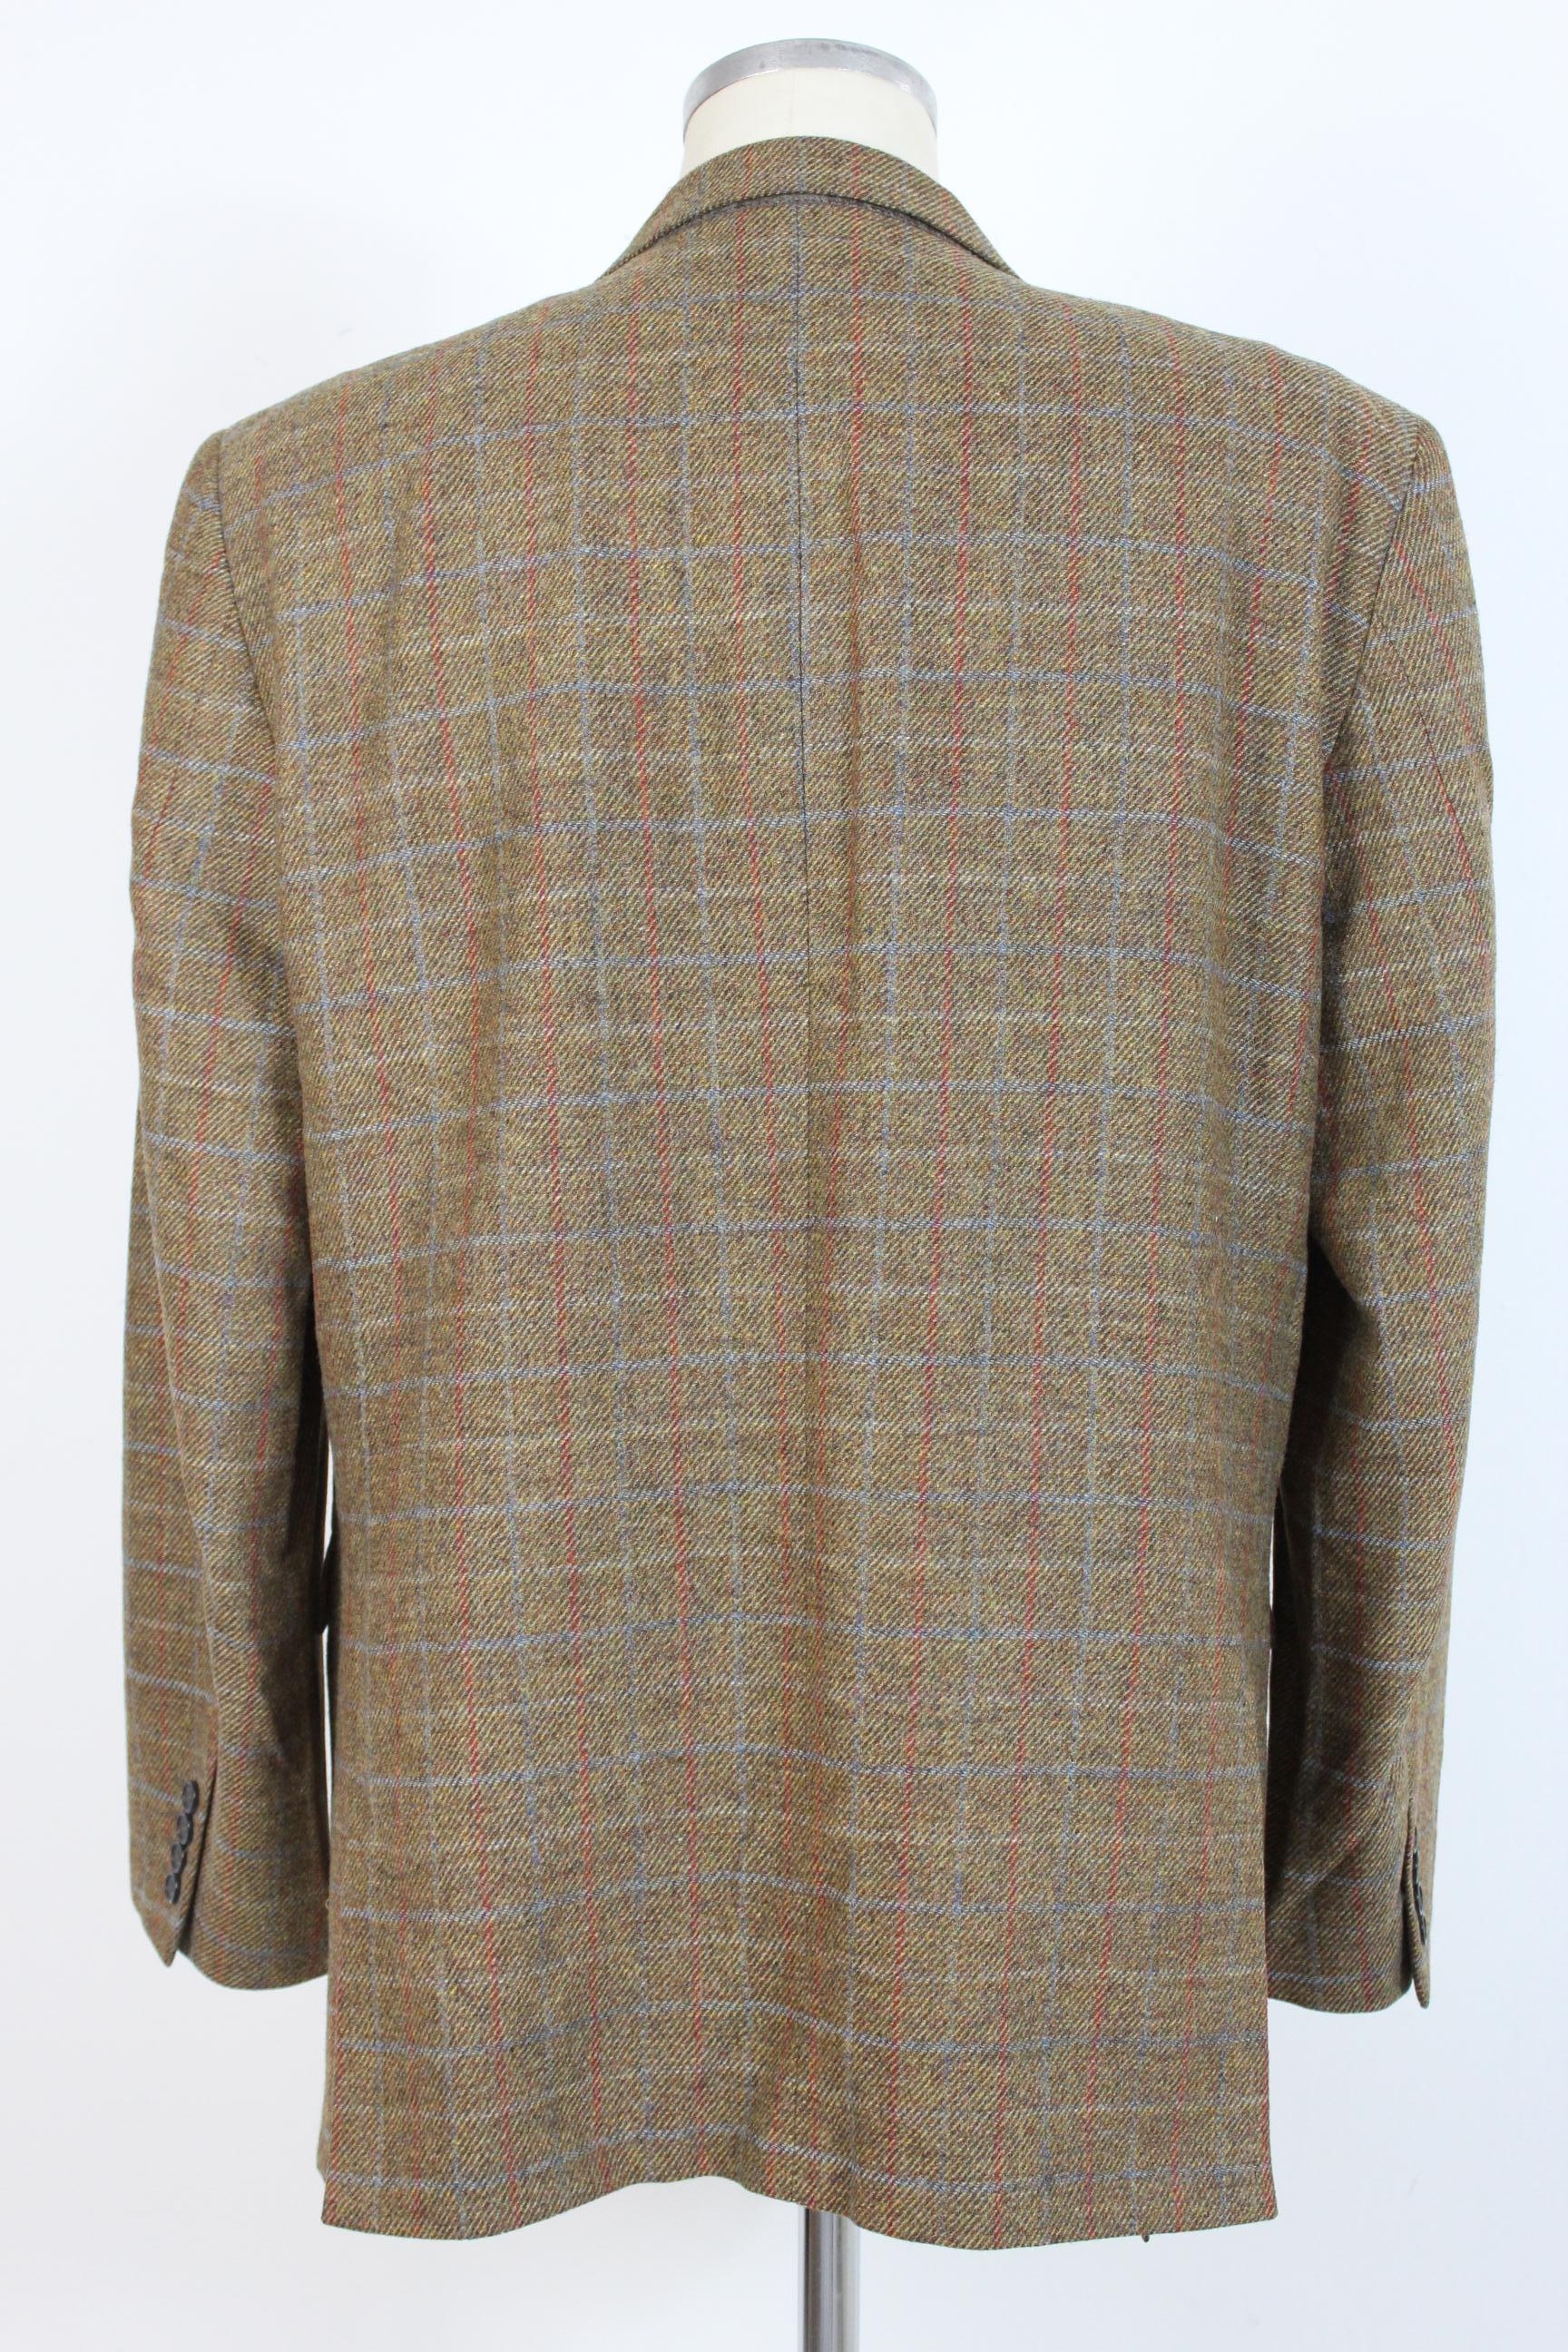 Pierre Cardin vintage 80s men's jacket. Harris Tweed fabric, color beige, blue and red, 100% wool. Made in Italy. Excellent vintage conditions.

Size: 52 It 42 Us 42 Uk


Shoulder: 52 cm
Bust / Chest: 62 cm
Sleeve: 65 cm
Length: 89 cm